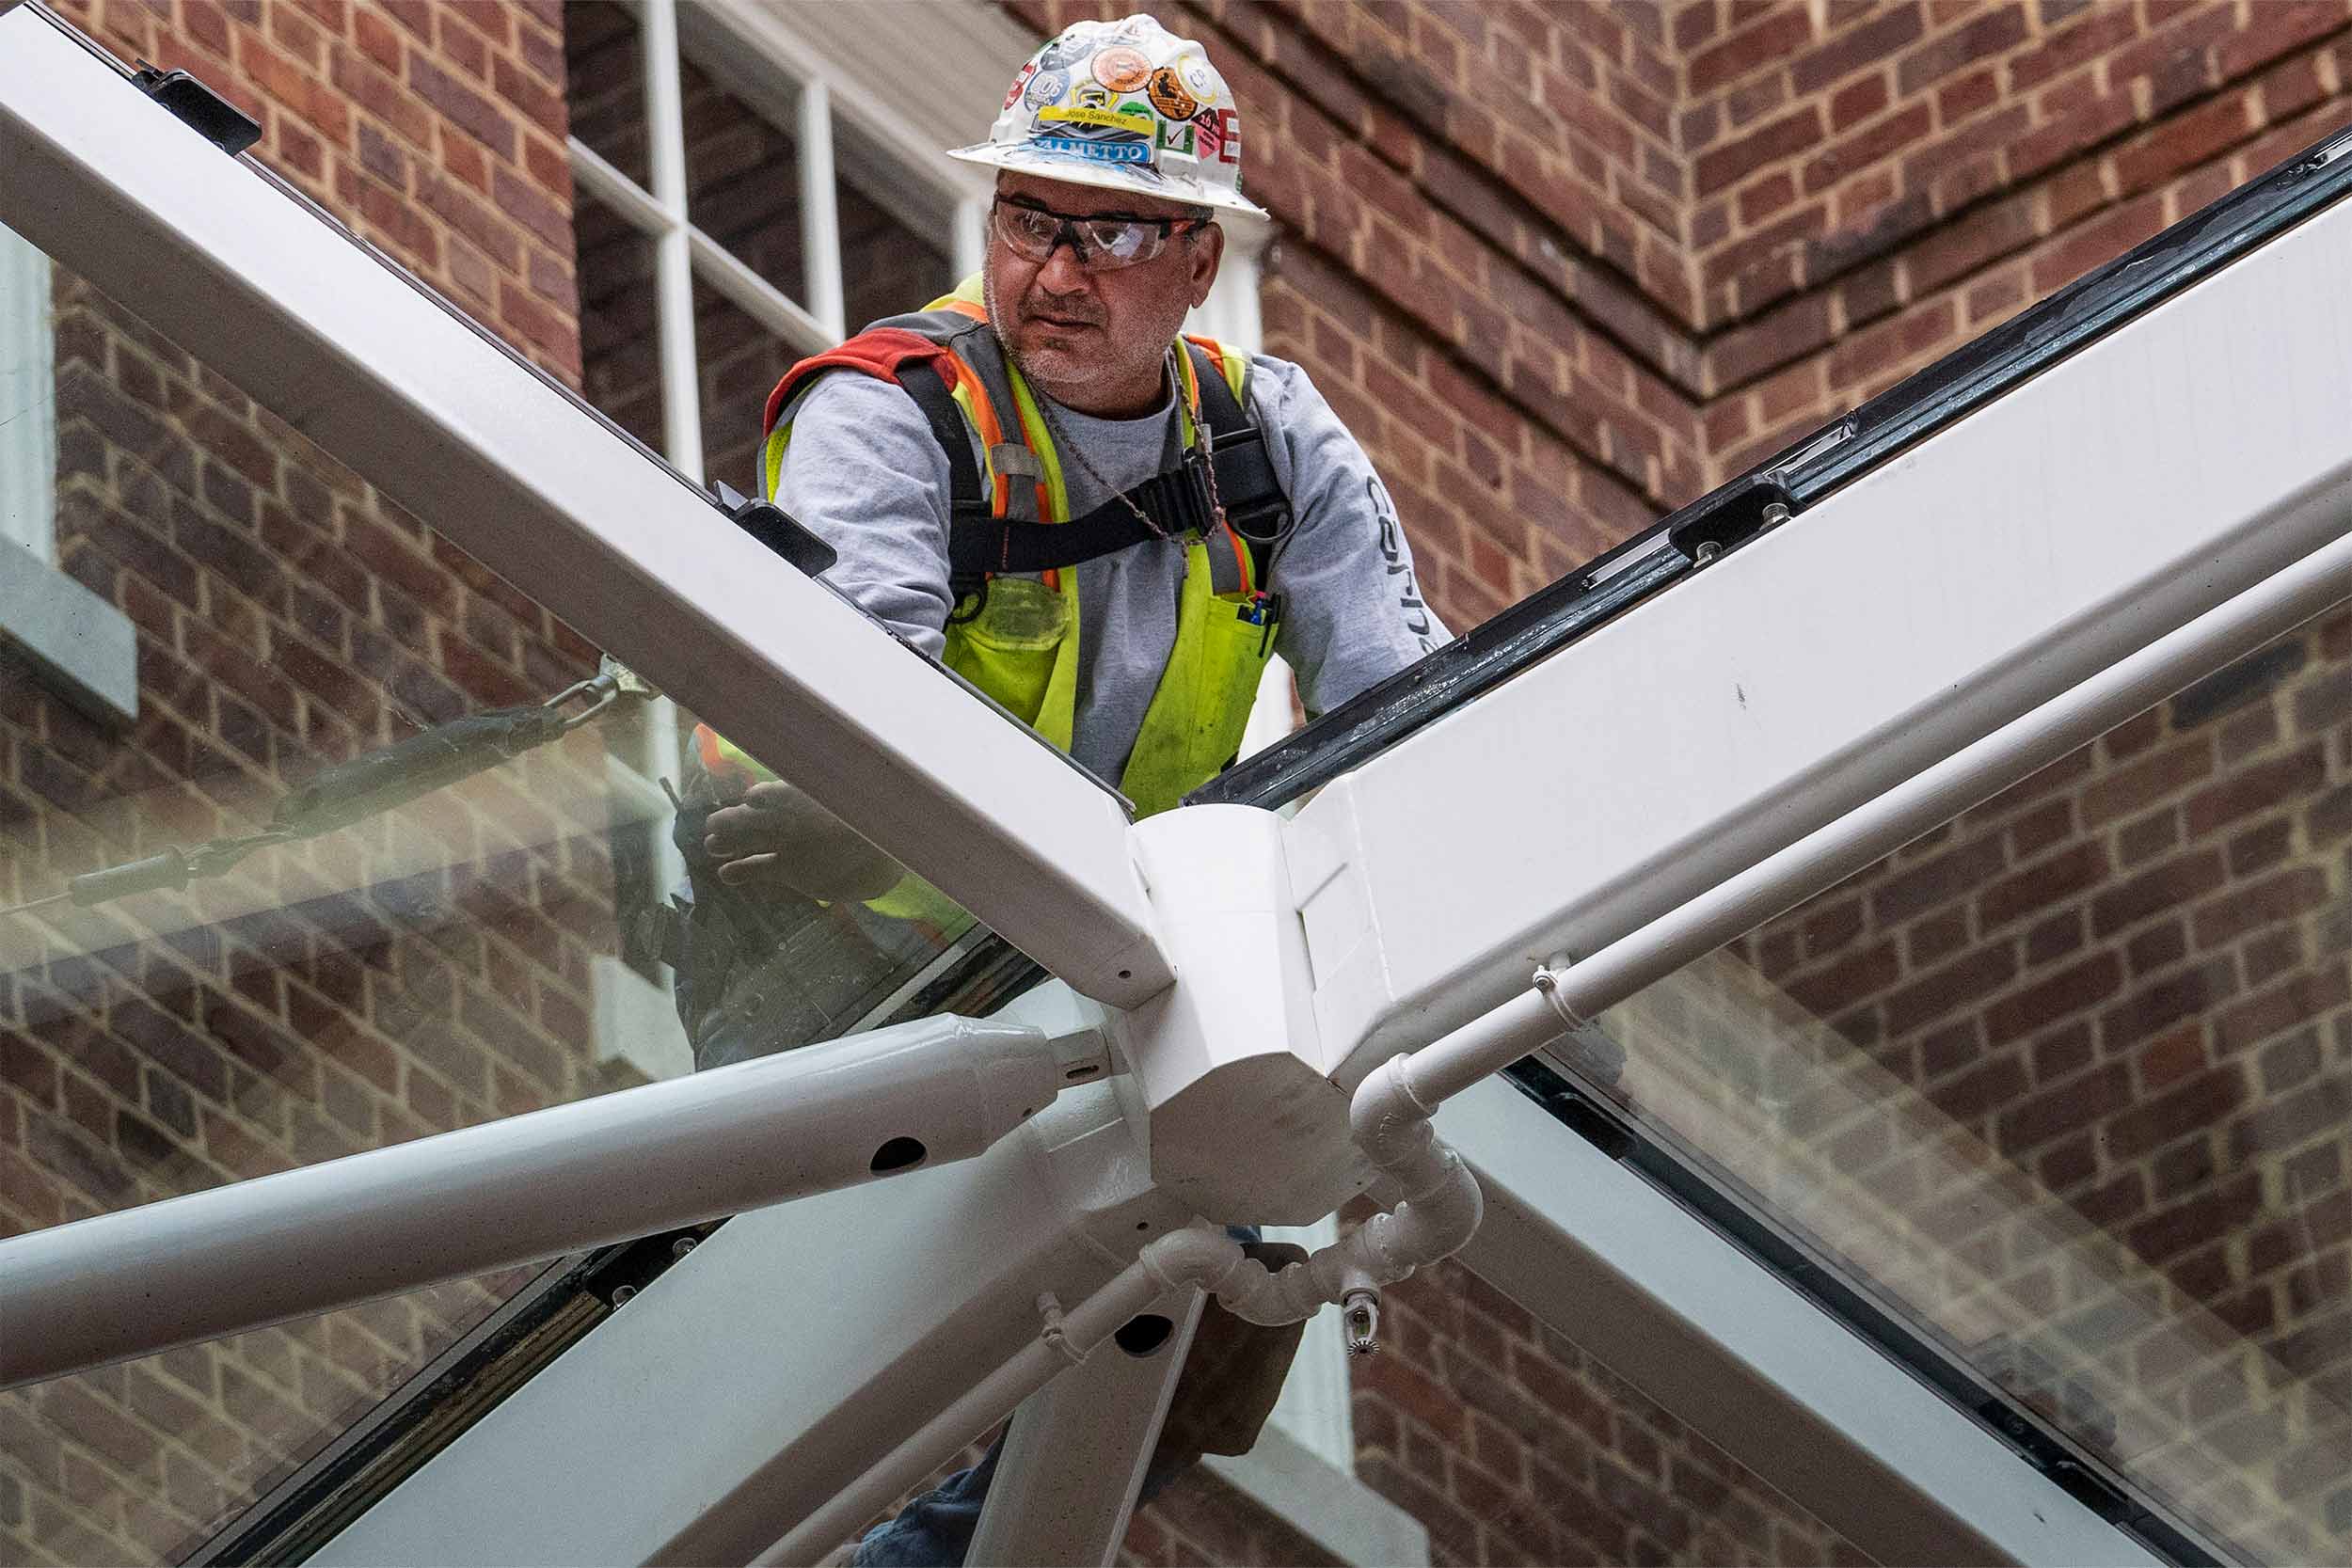 A worker on hands and knees on a pane of already installed glass guides another pane into place